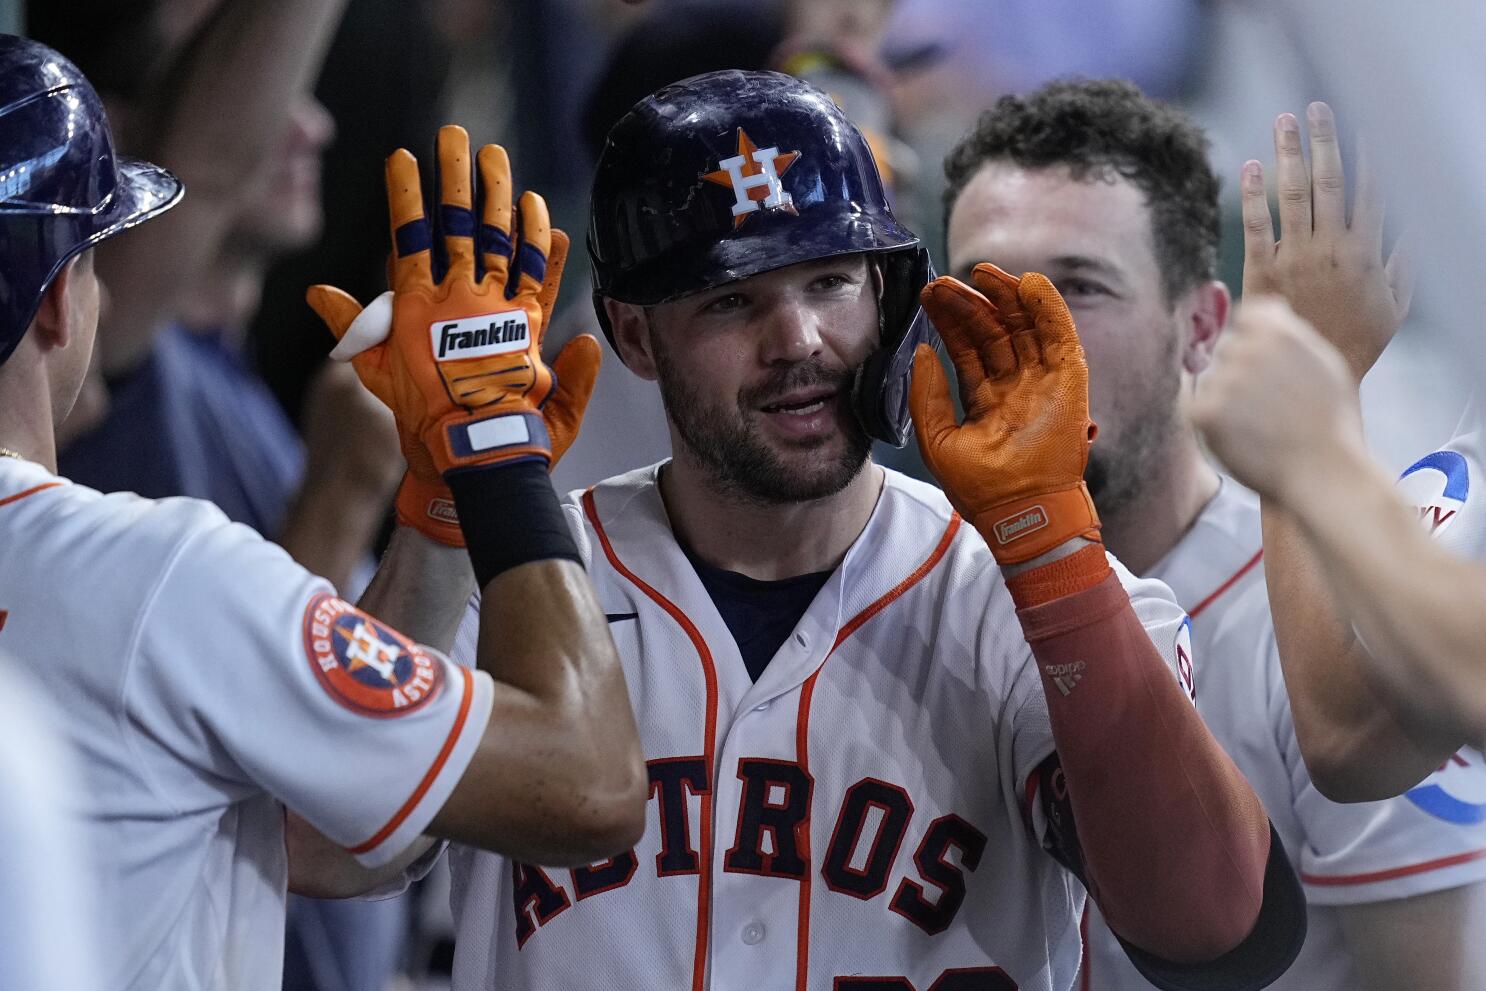 McCormick homers twice and drives in 4 runs to lead the Astros to